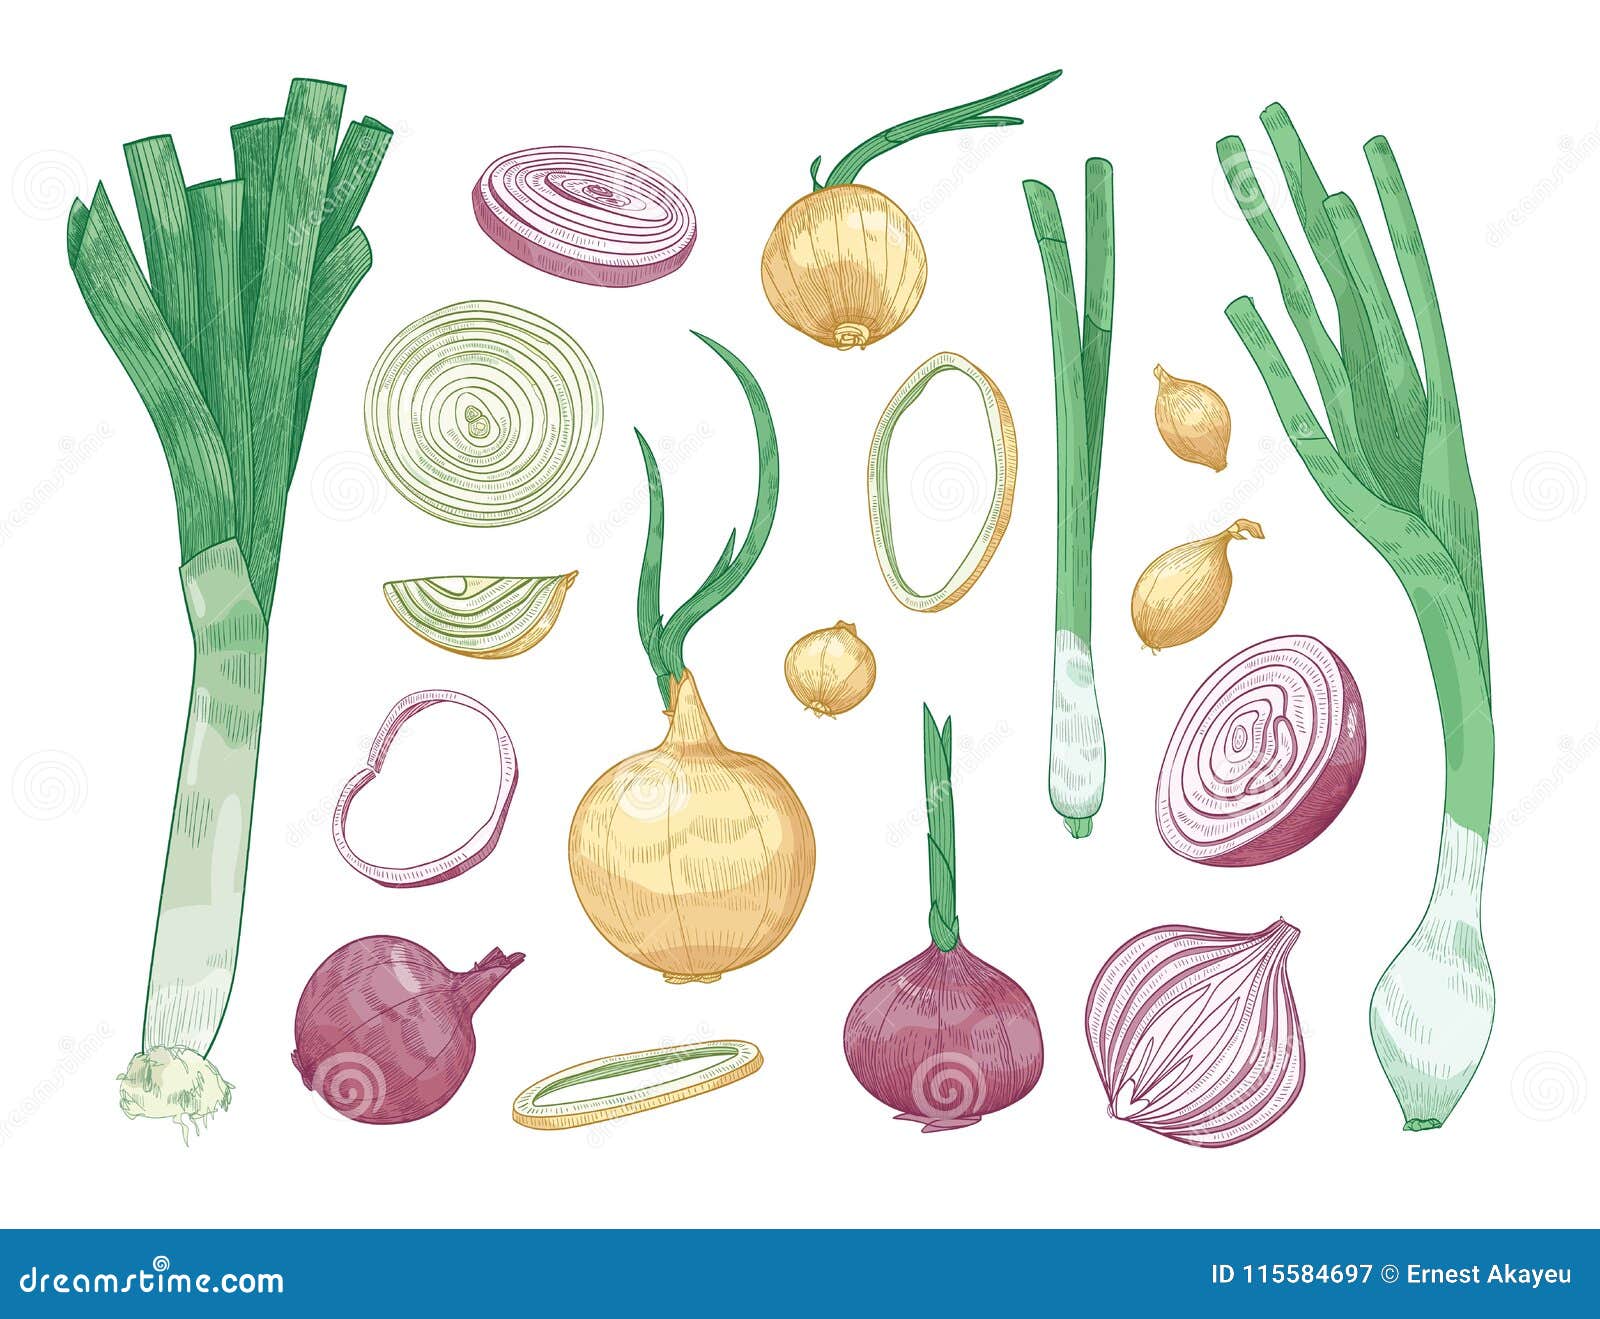 https://thumbs.dreamstime.com/z/bundle-different-whole-cut-onions-isolated-white-background-set-colorful-drawings-raw-vegetables-various-types-115584697.jpg